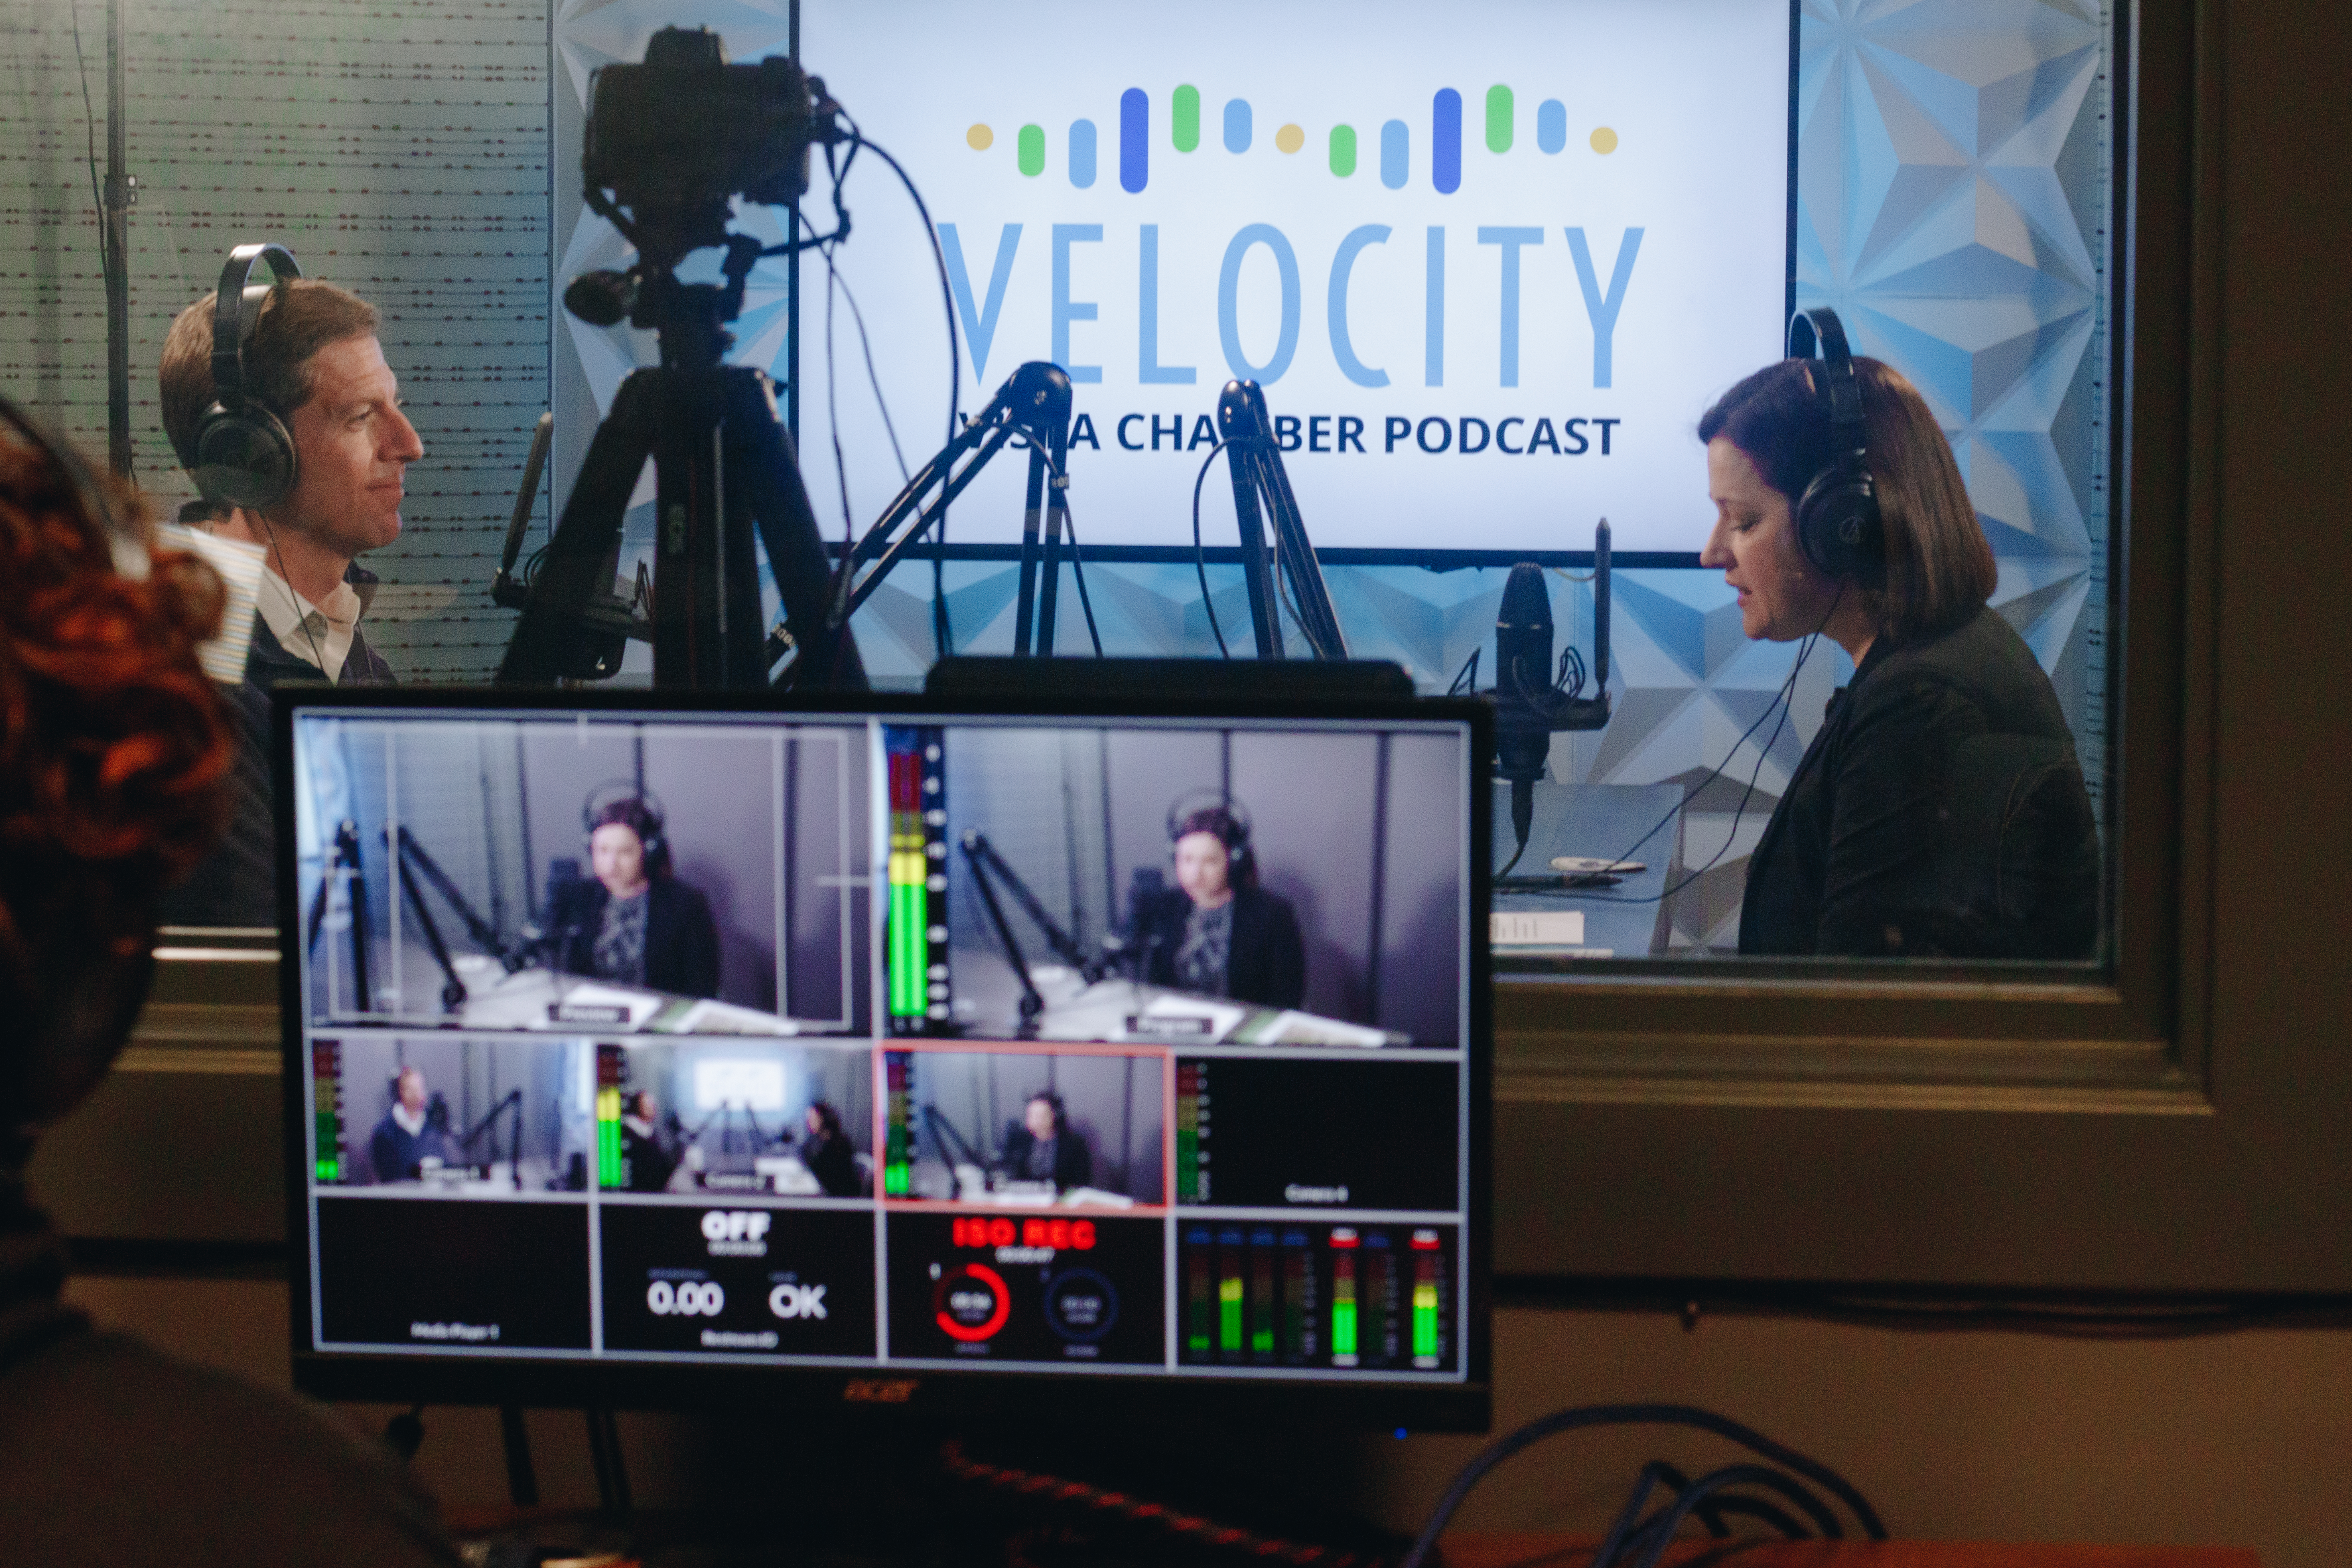 Velocity podcast behind the scenes with Rachel and Mike Levin